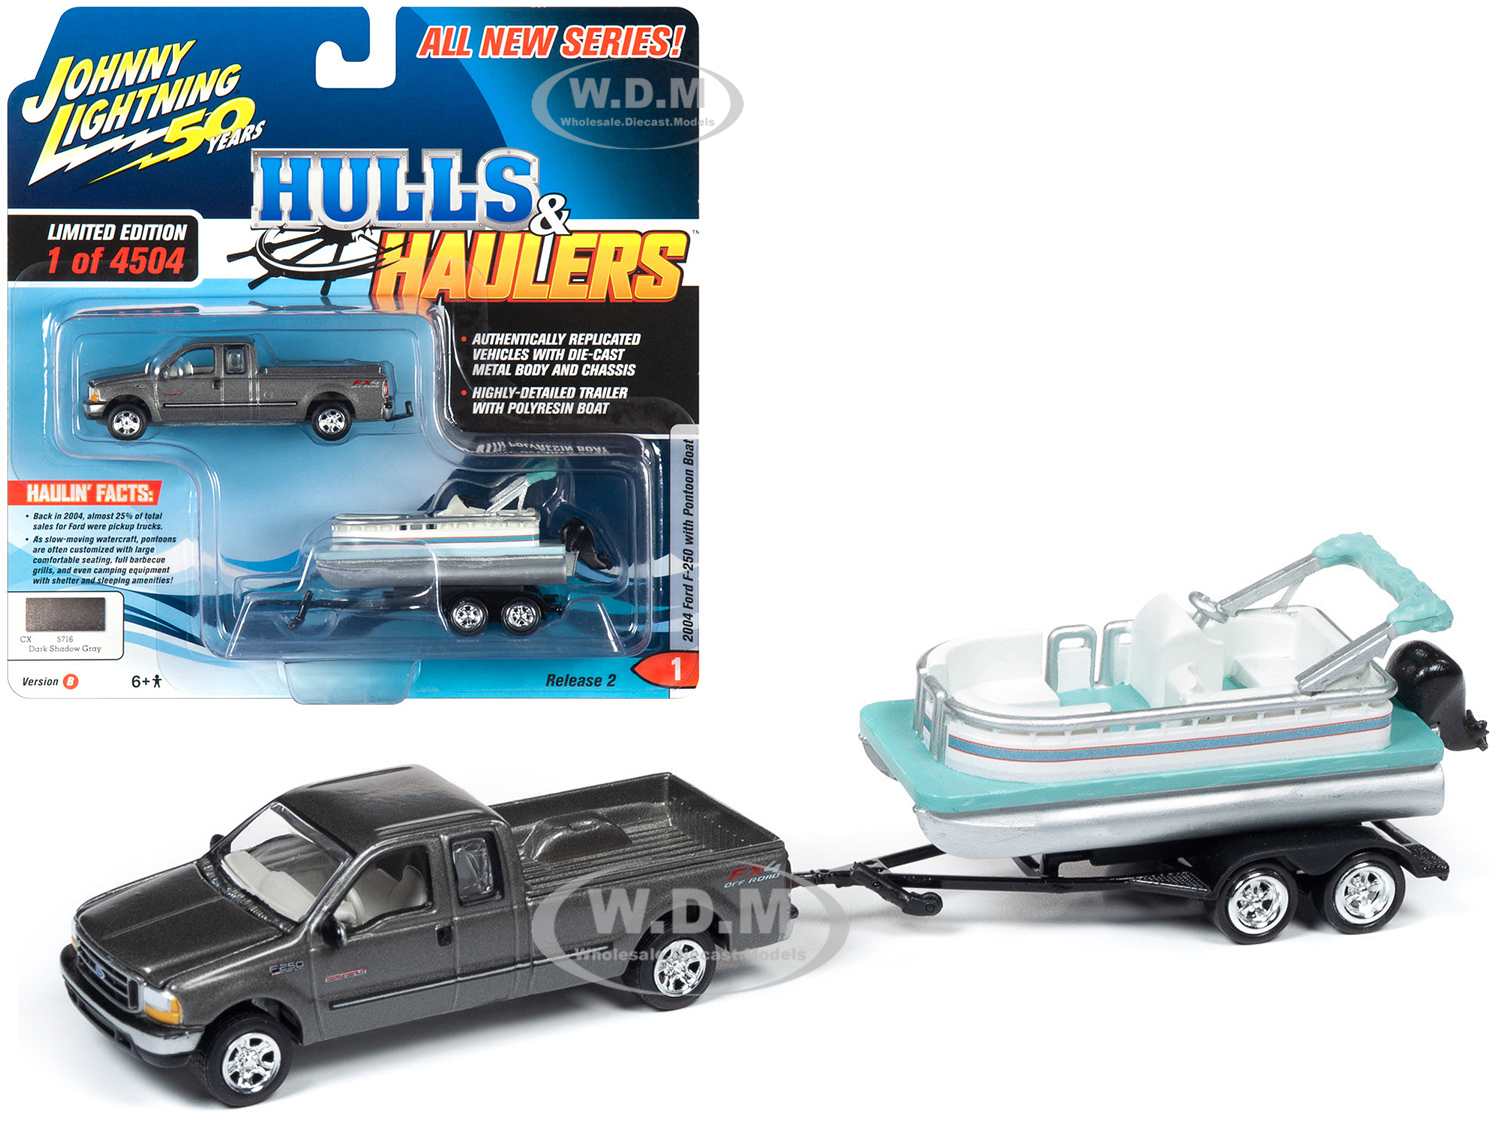 2004 Ford F-250 Pickup Truck Dark Shadow Gray Metallic With Pontoon Boat Limited Edition To 4504 Pieces Worldwide "hulls & Haulers" Series 2 "joh